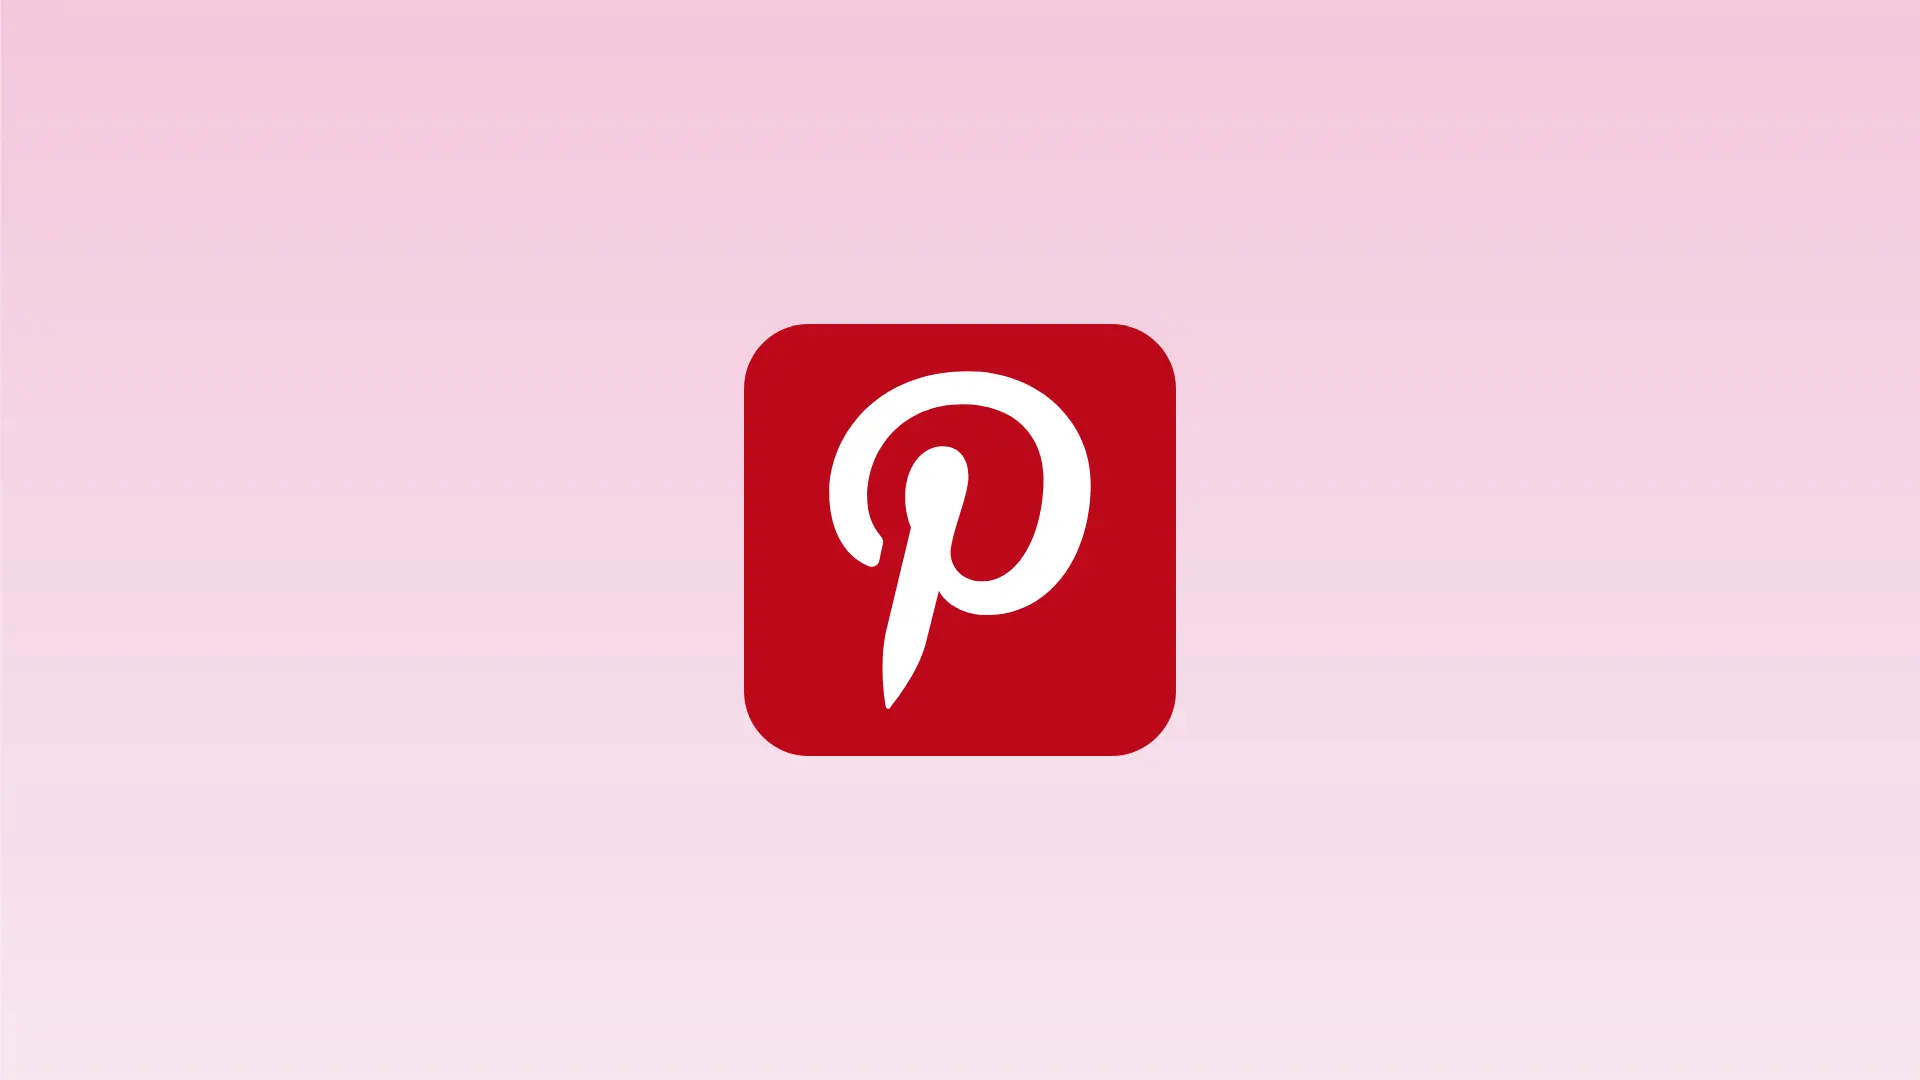 Pinterest giveaway rules